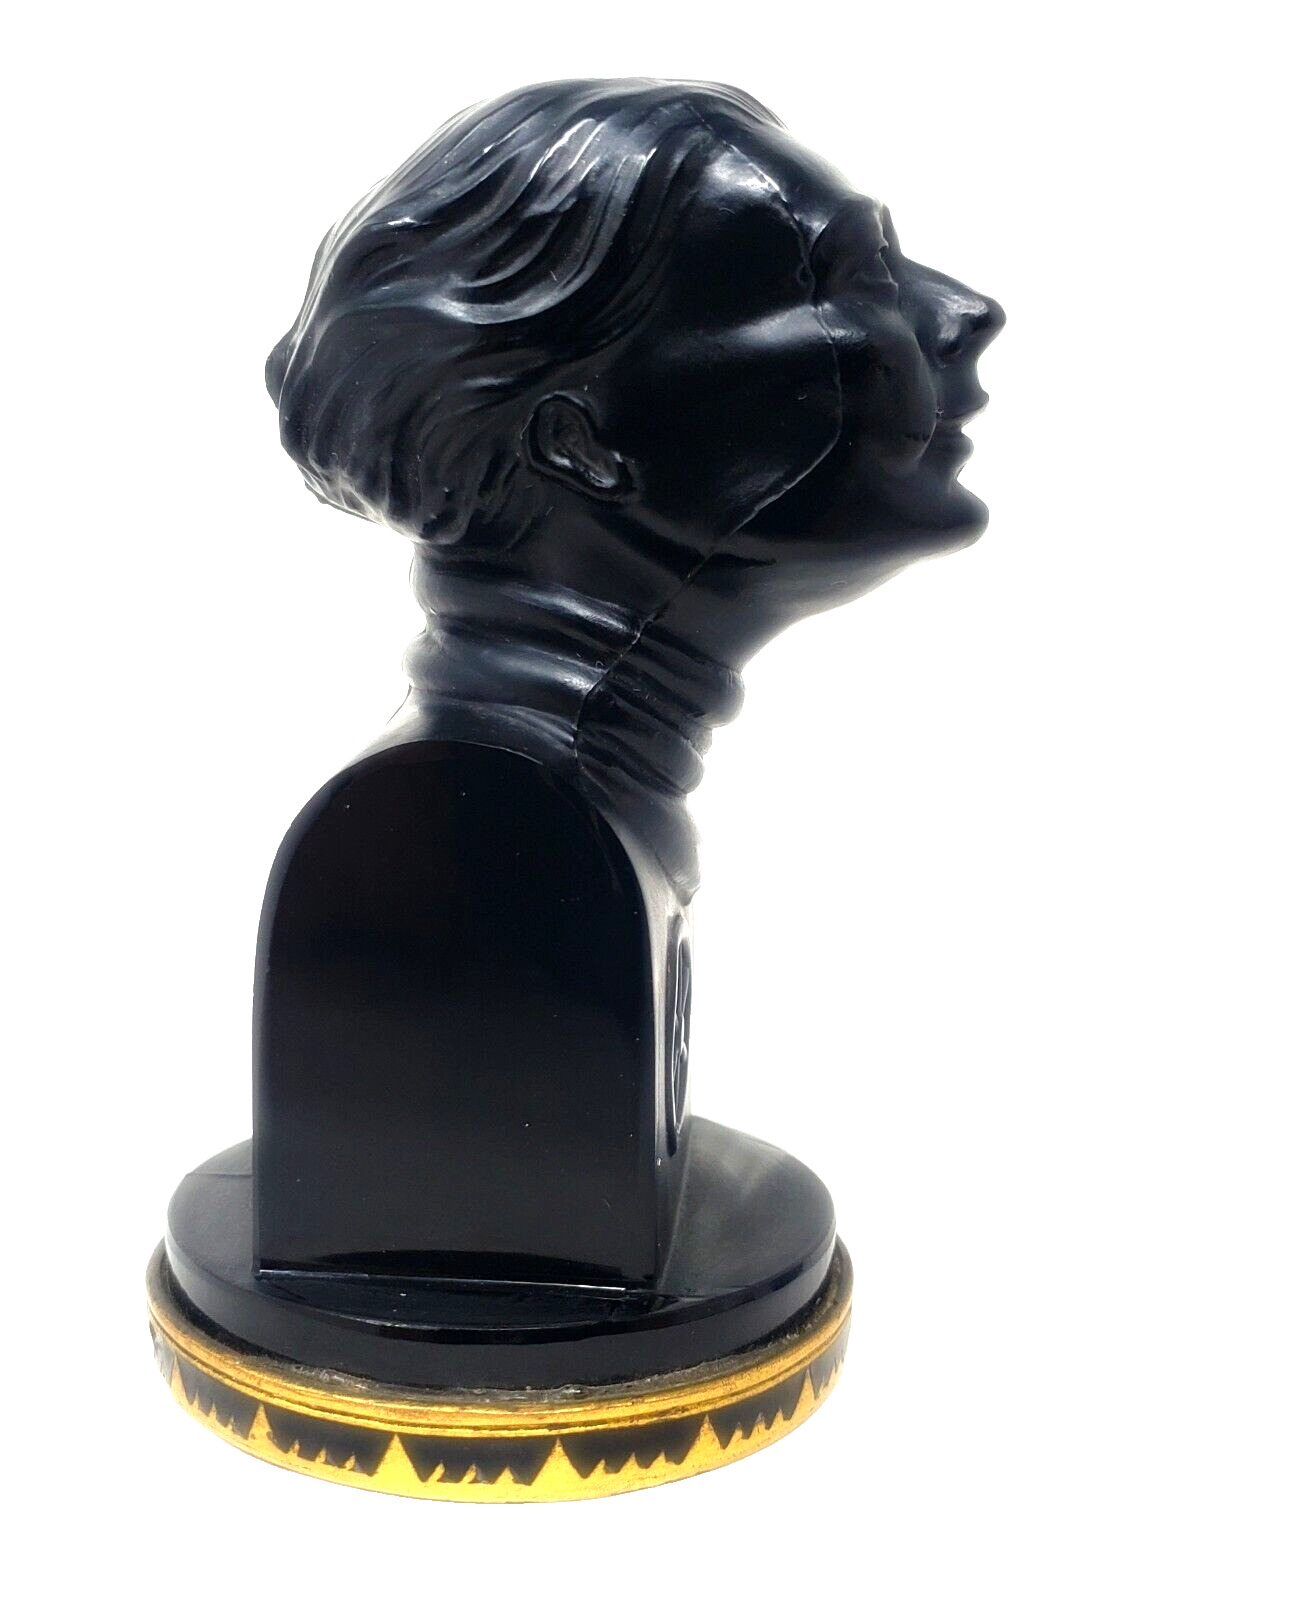 Amelia Earhart Paperweight - Very Unusual - Black Glass? - Famous Woman Pilot